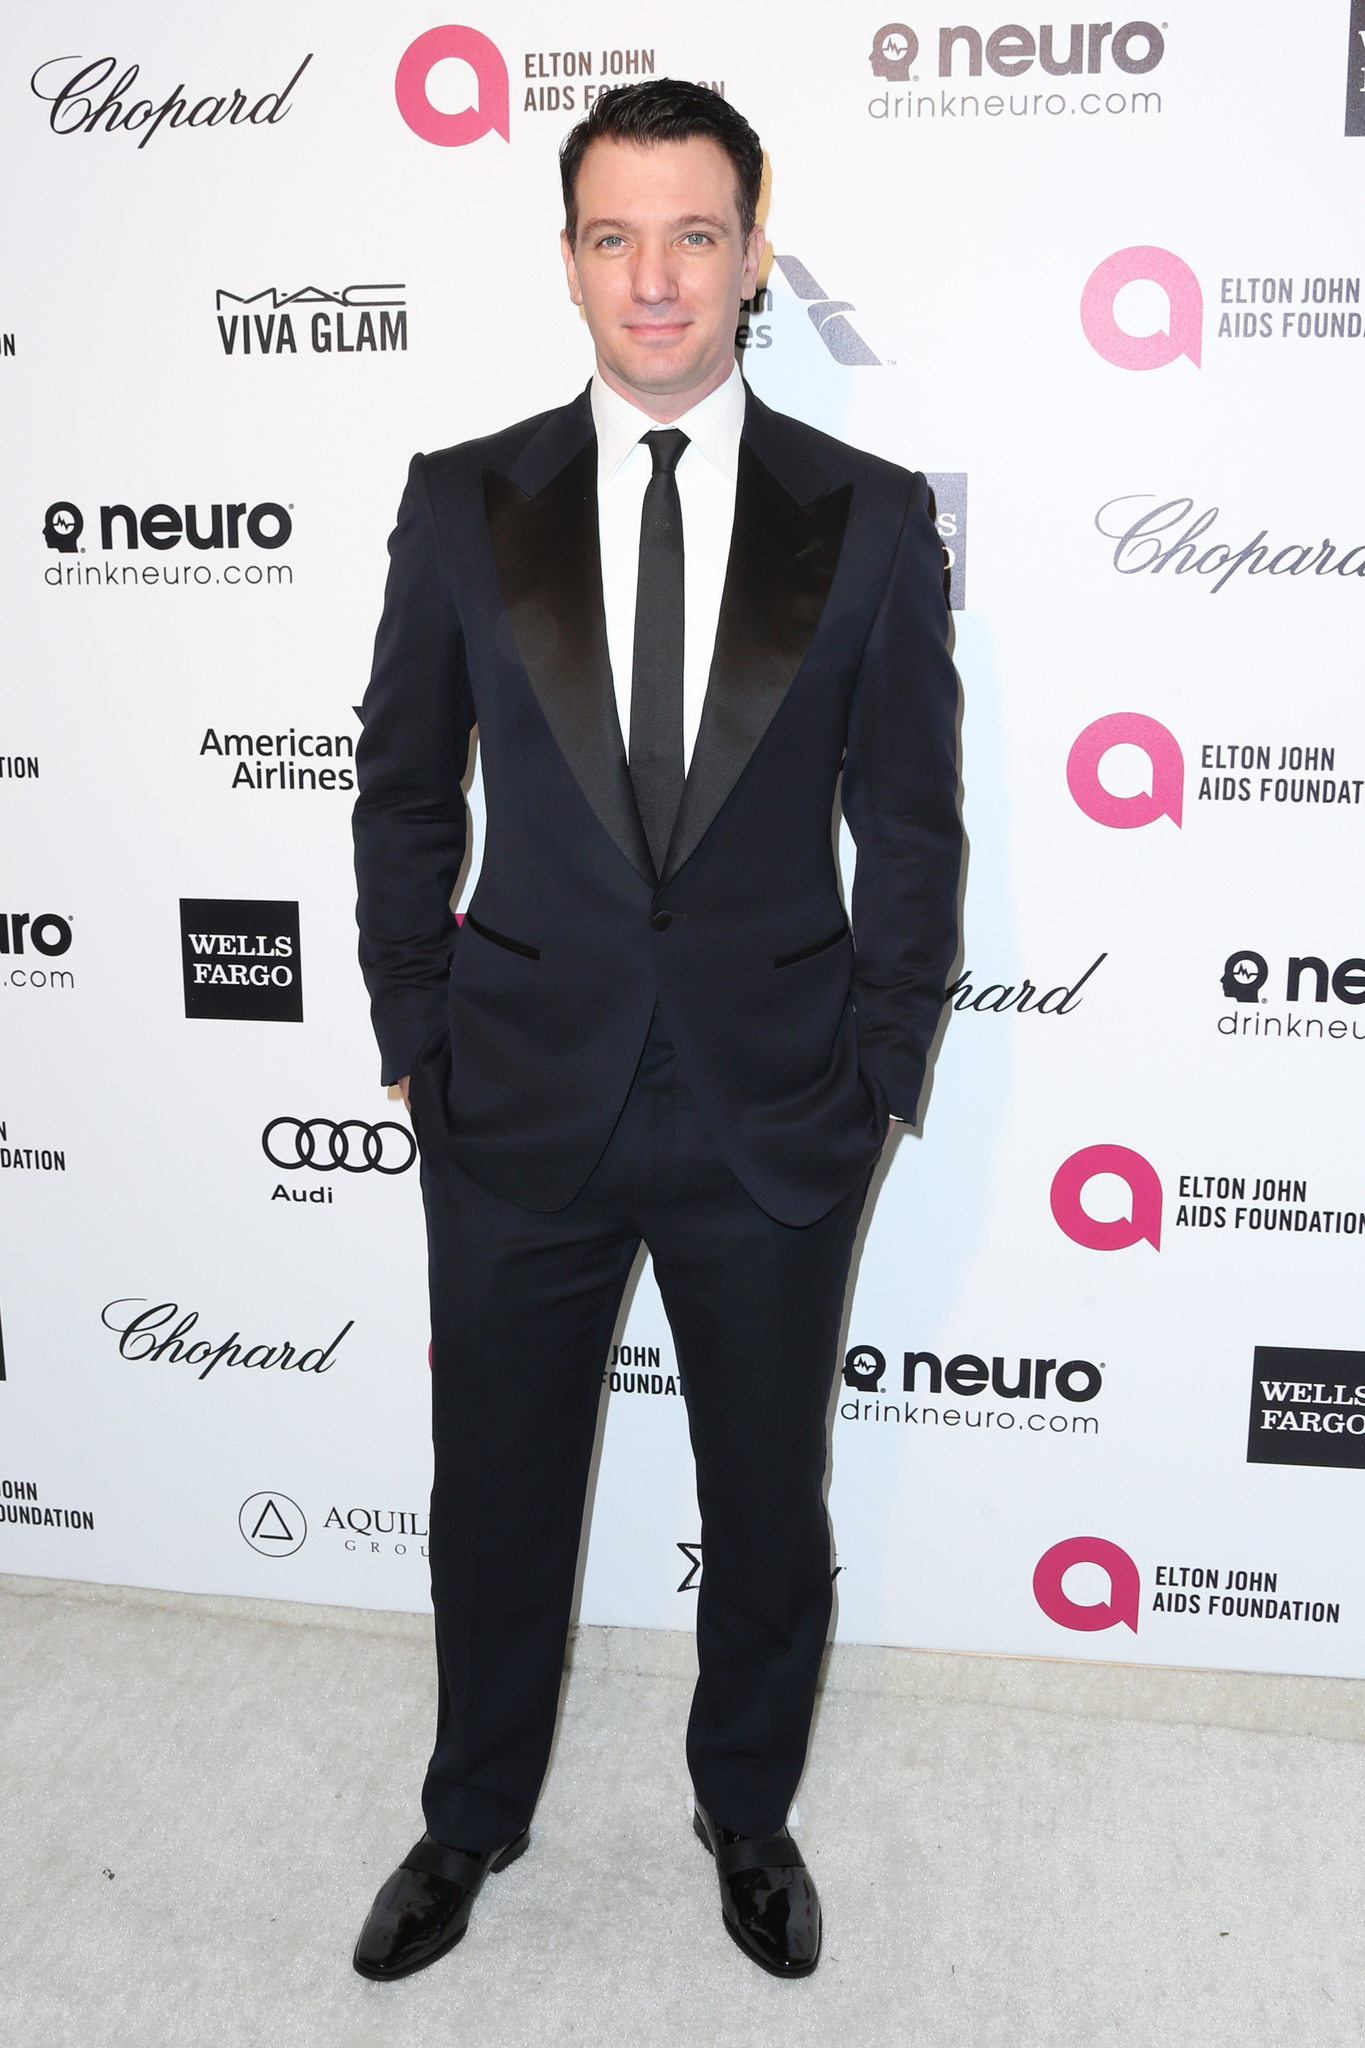 J.C. Chasez at event of The Oscars (2015)